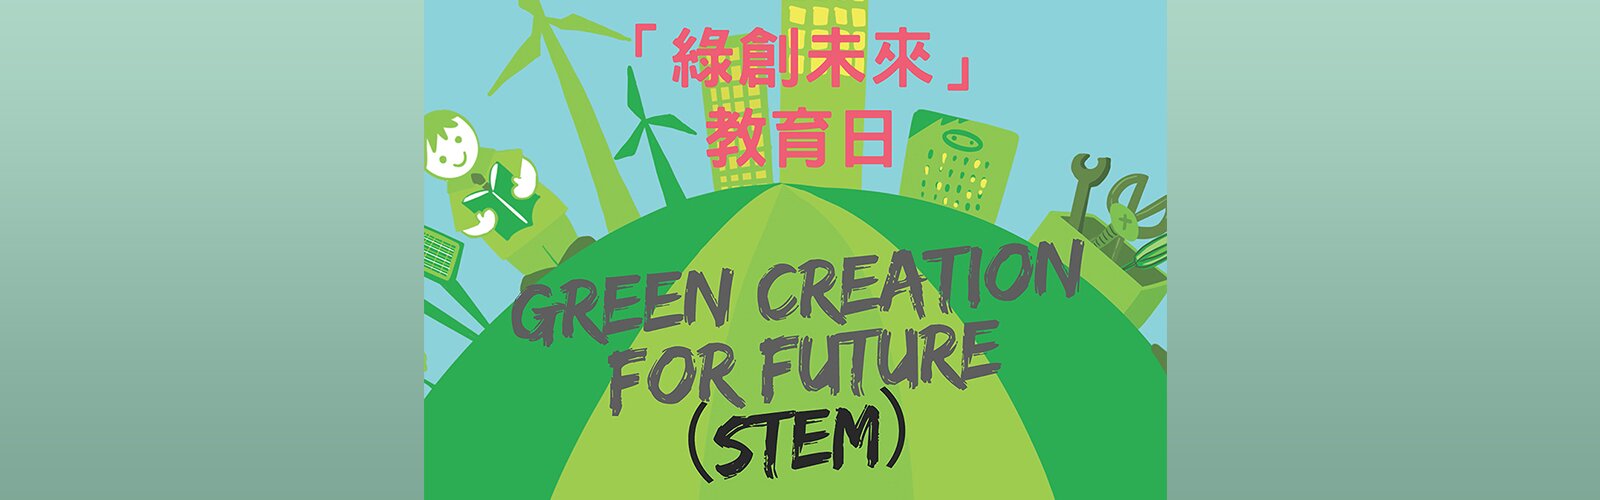 Green Creation for Future（STEM）